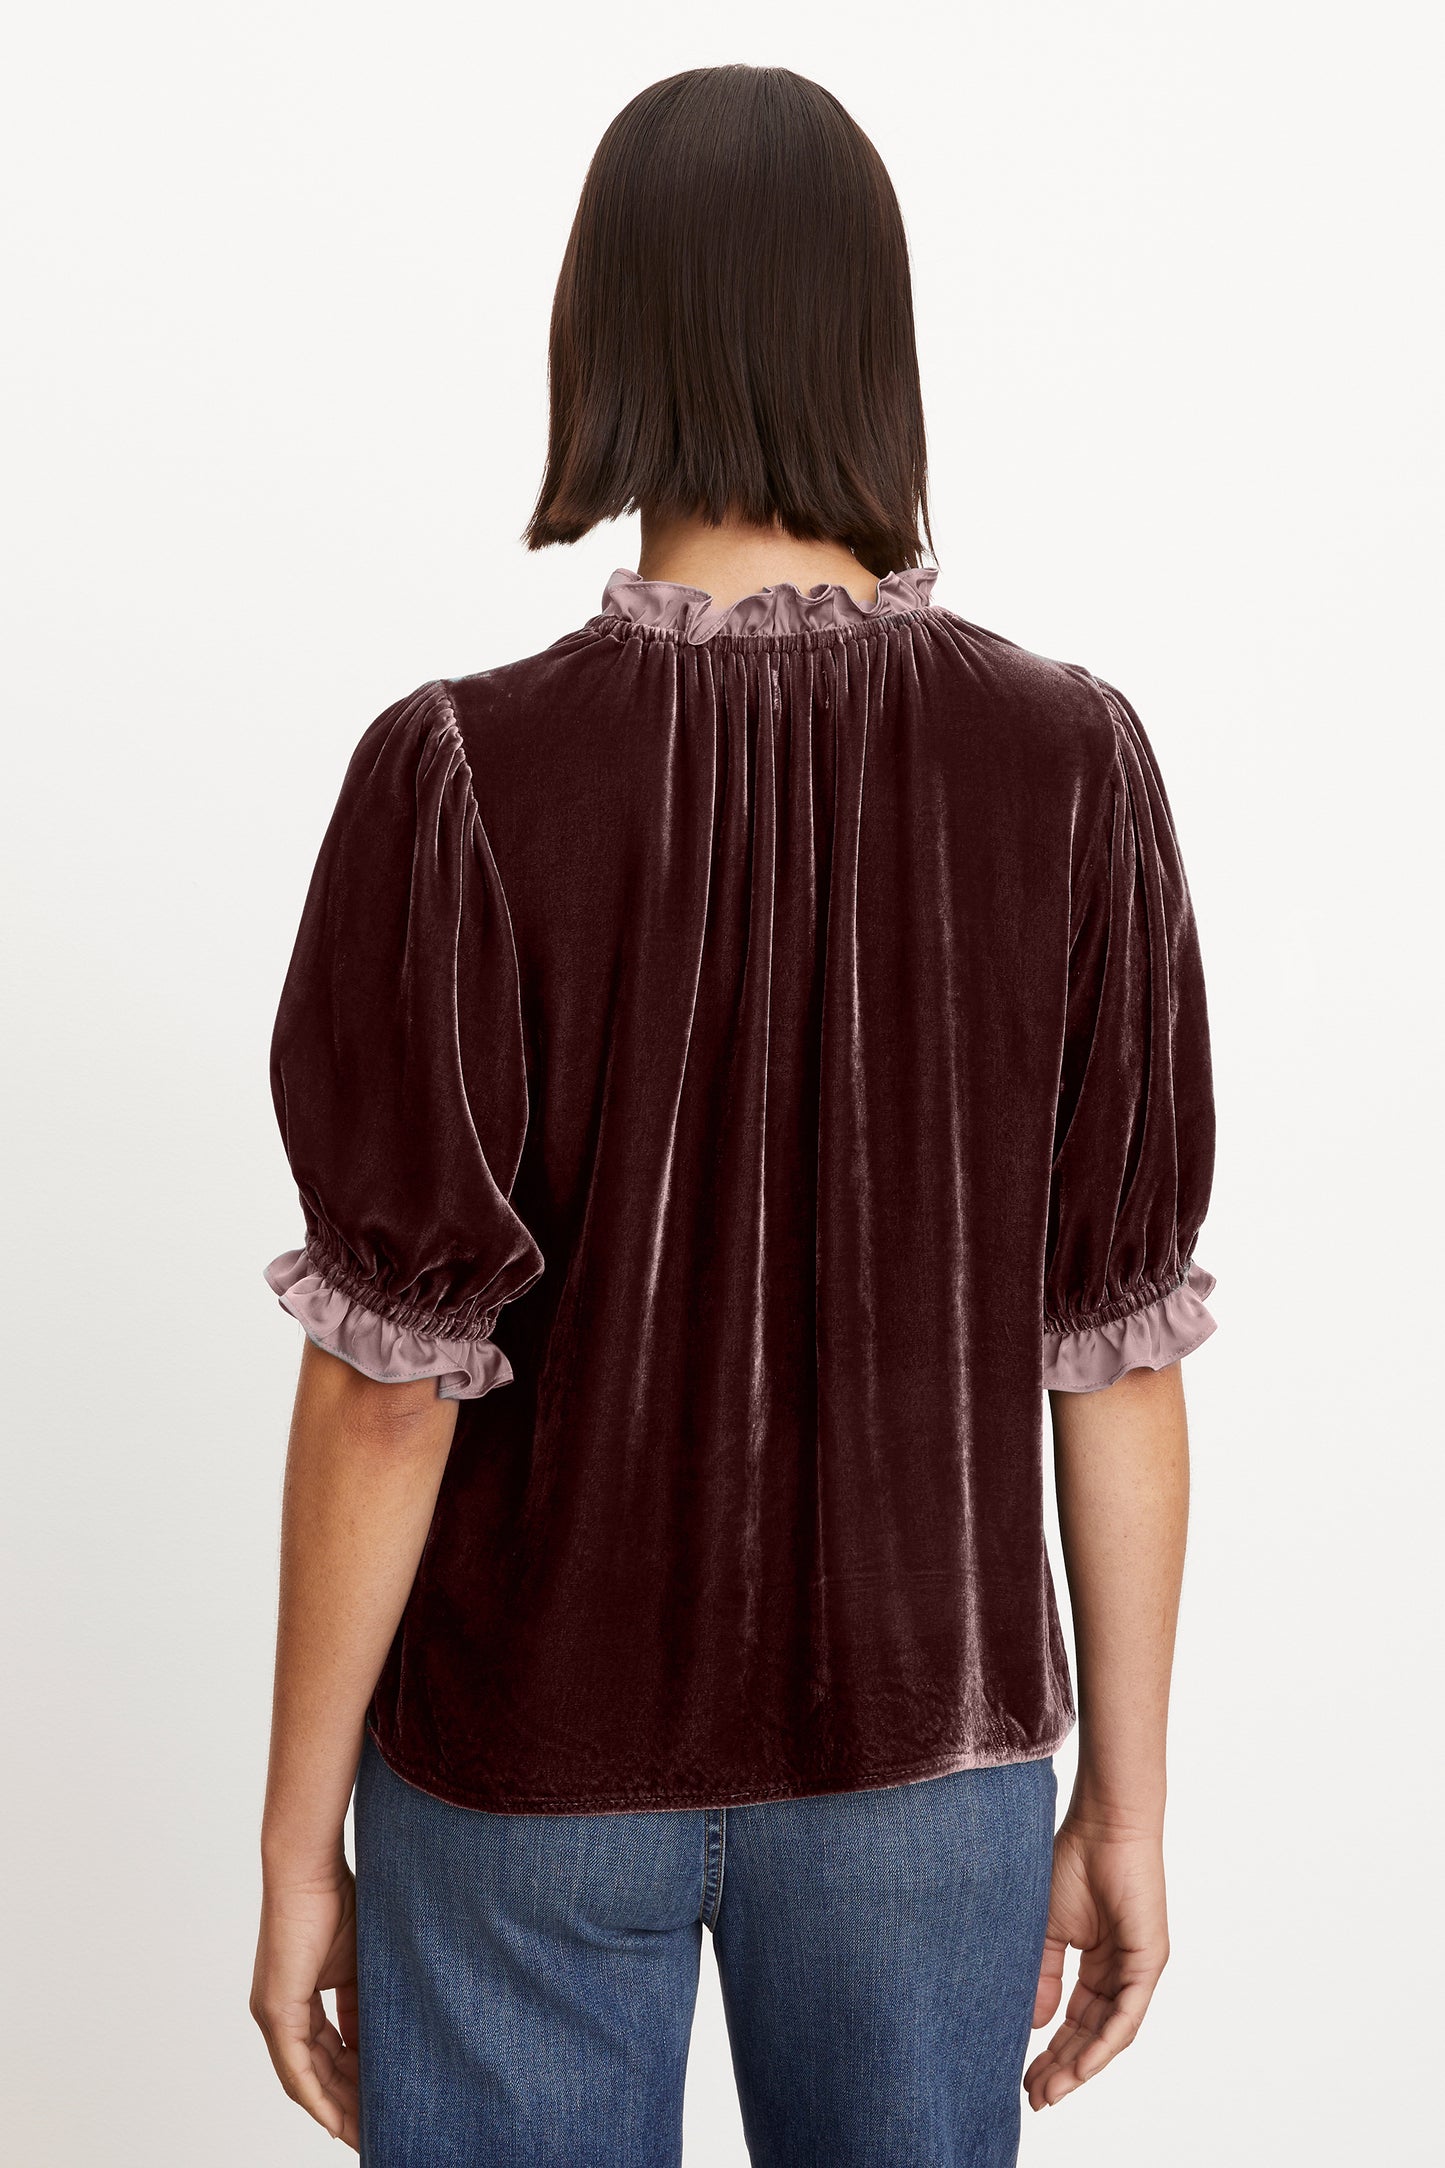 VAL TOP IN WINEBERRY